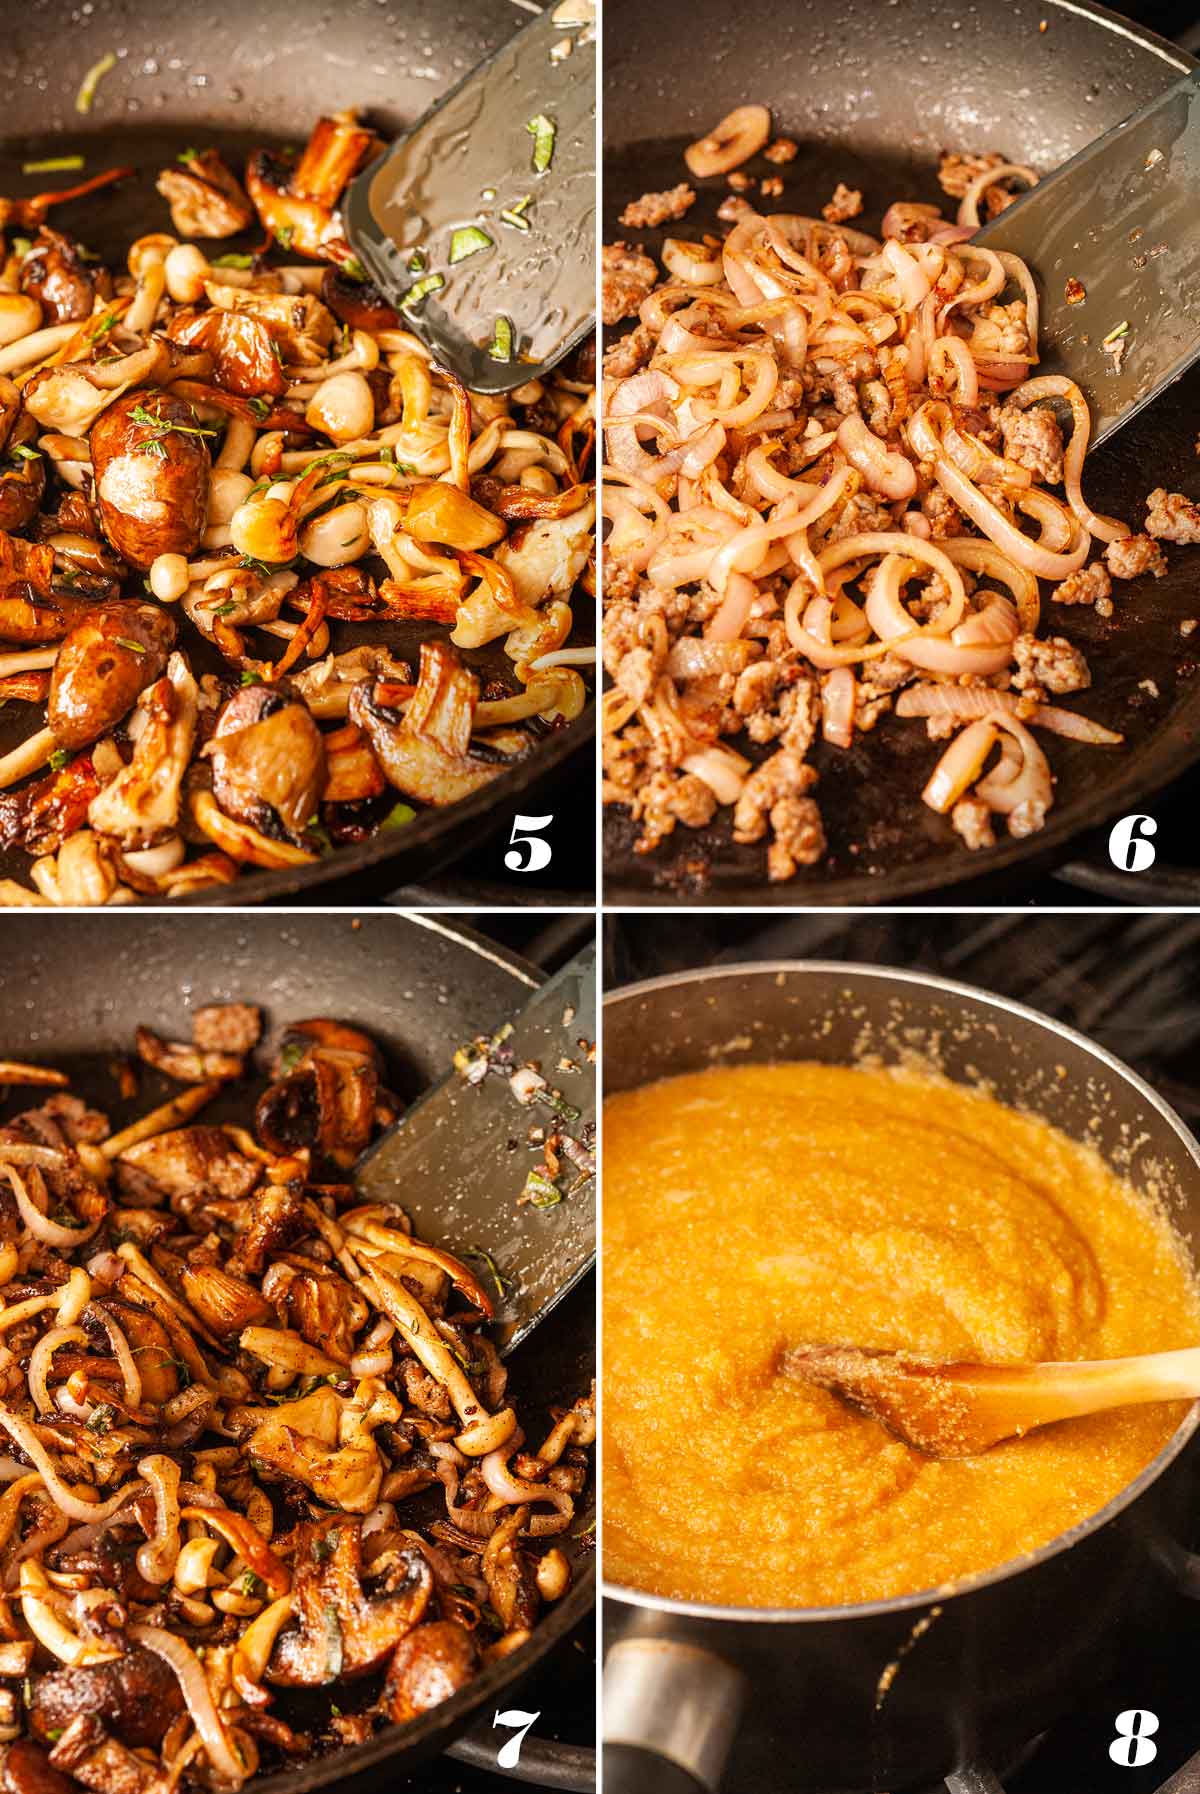 A collage of 4 numbered images showing how to make pumpkin polenta with mushrooms.